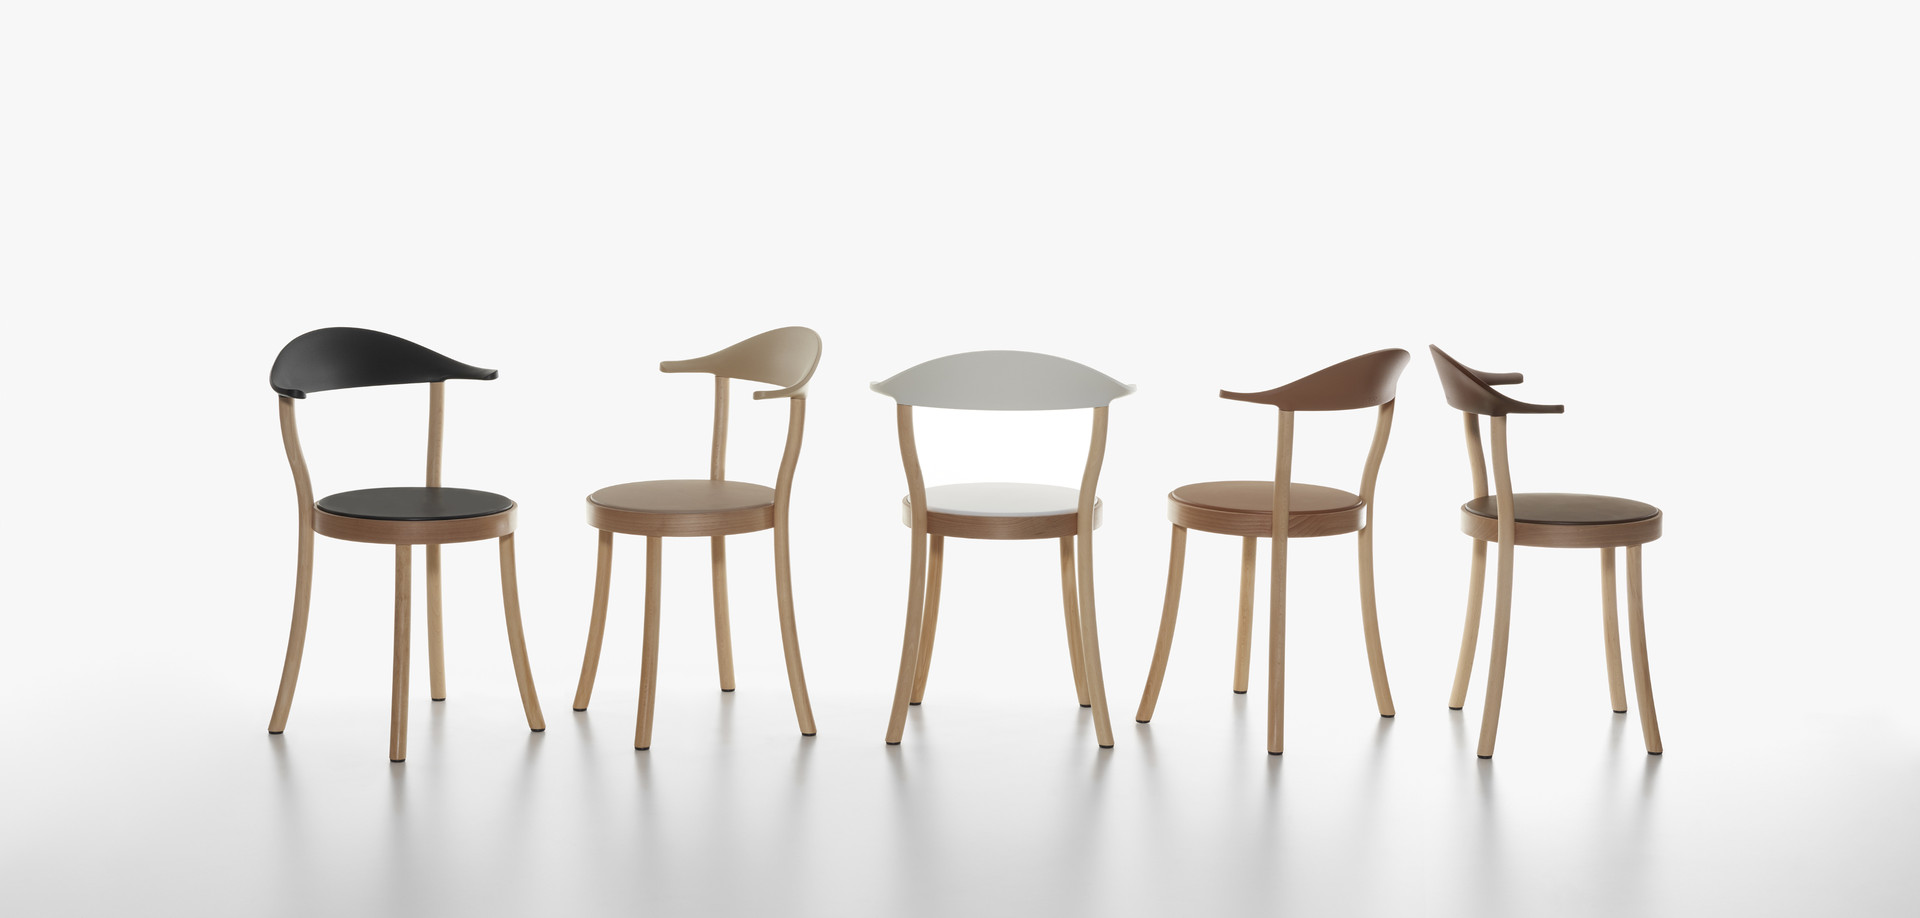 Plank - MONZA BISTRO chair, beech natural, backrests and seats in black, cafe latte, white, caramel, terra brown.